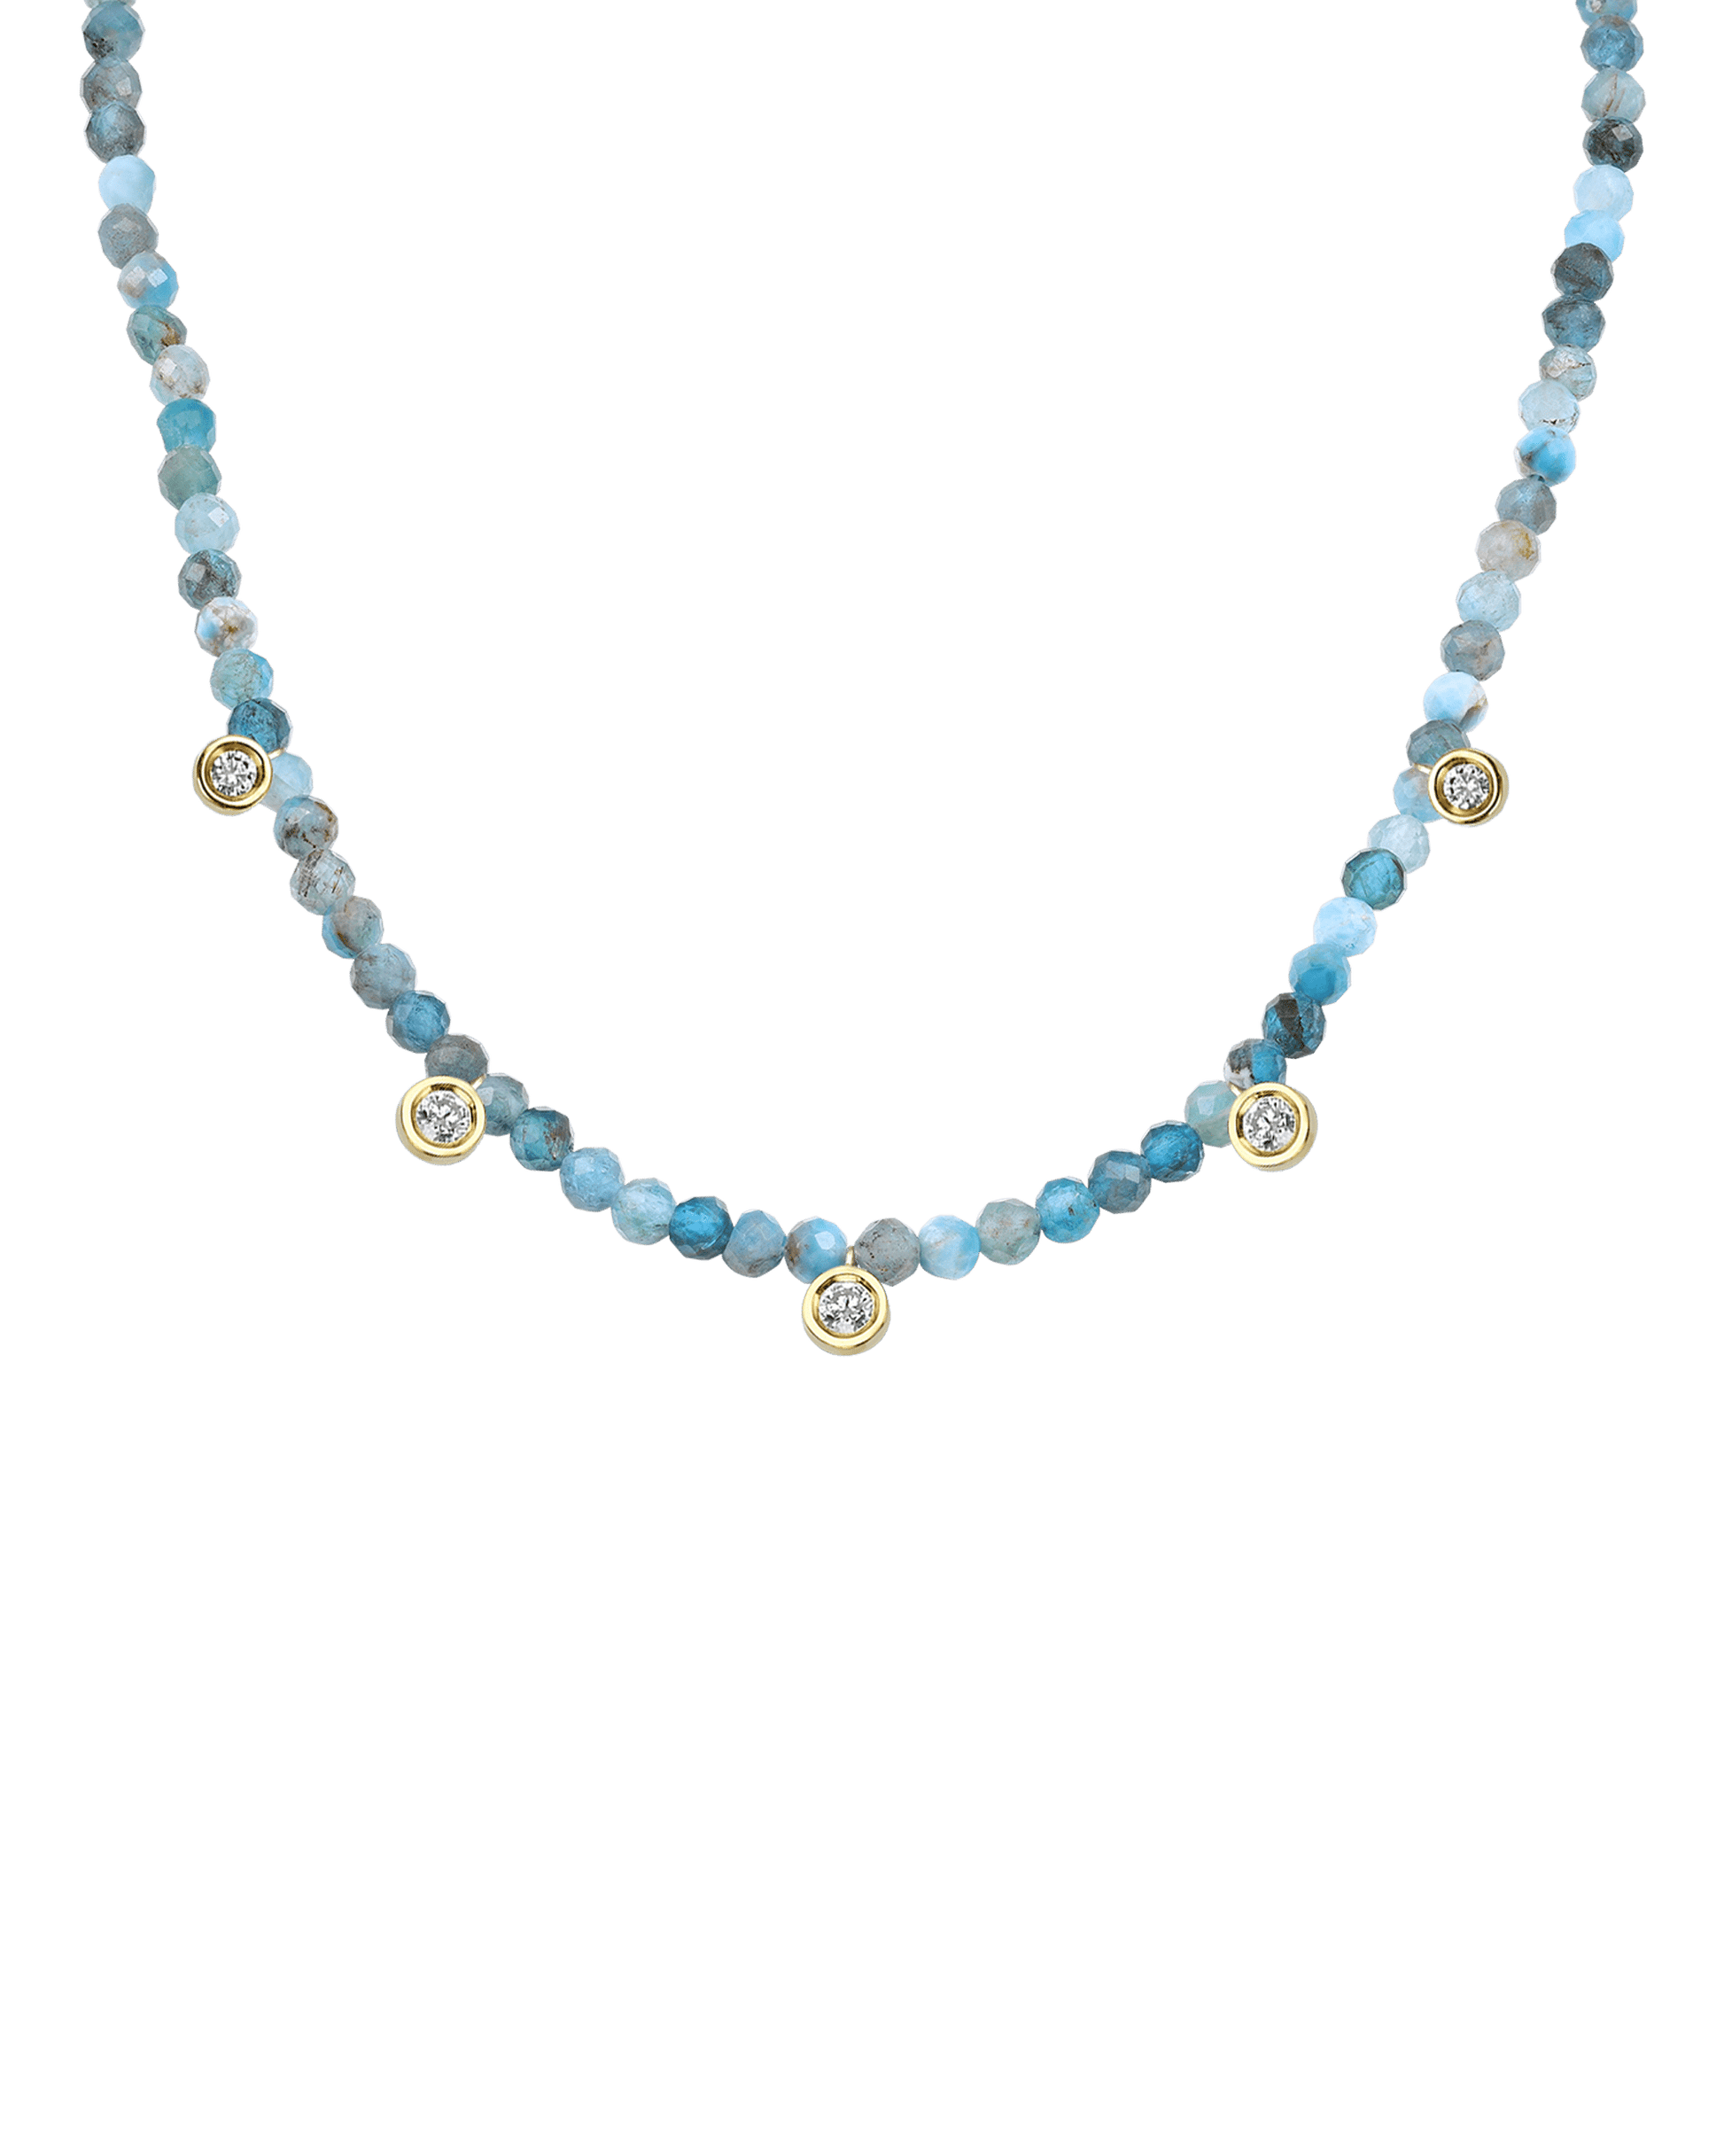 Turquoise Gemstone & Five diamonds Necklace - 14K Rose Gold Necklaces magal-dev 